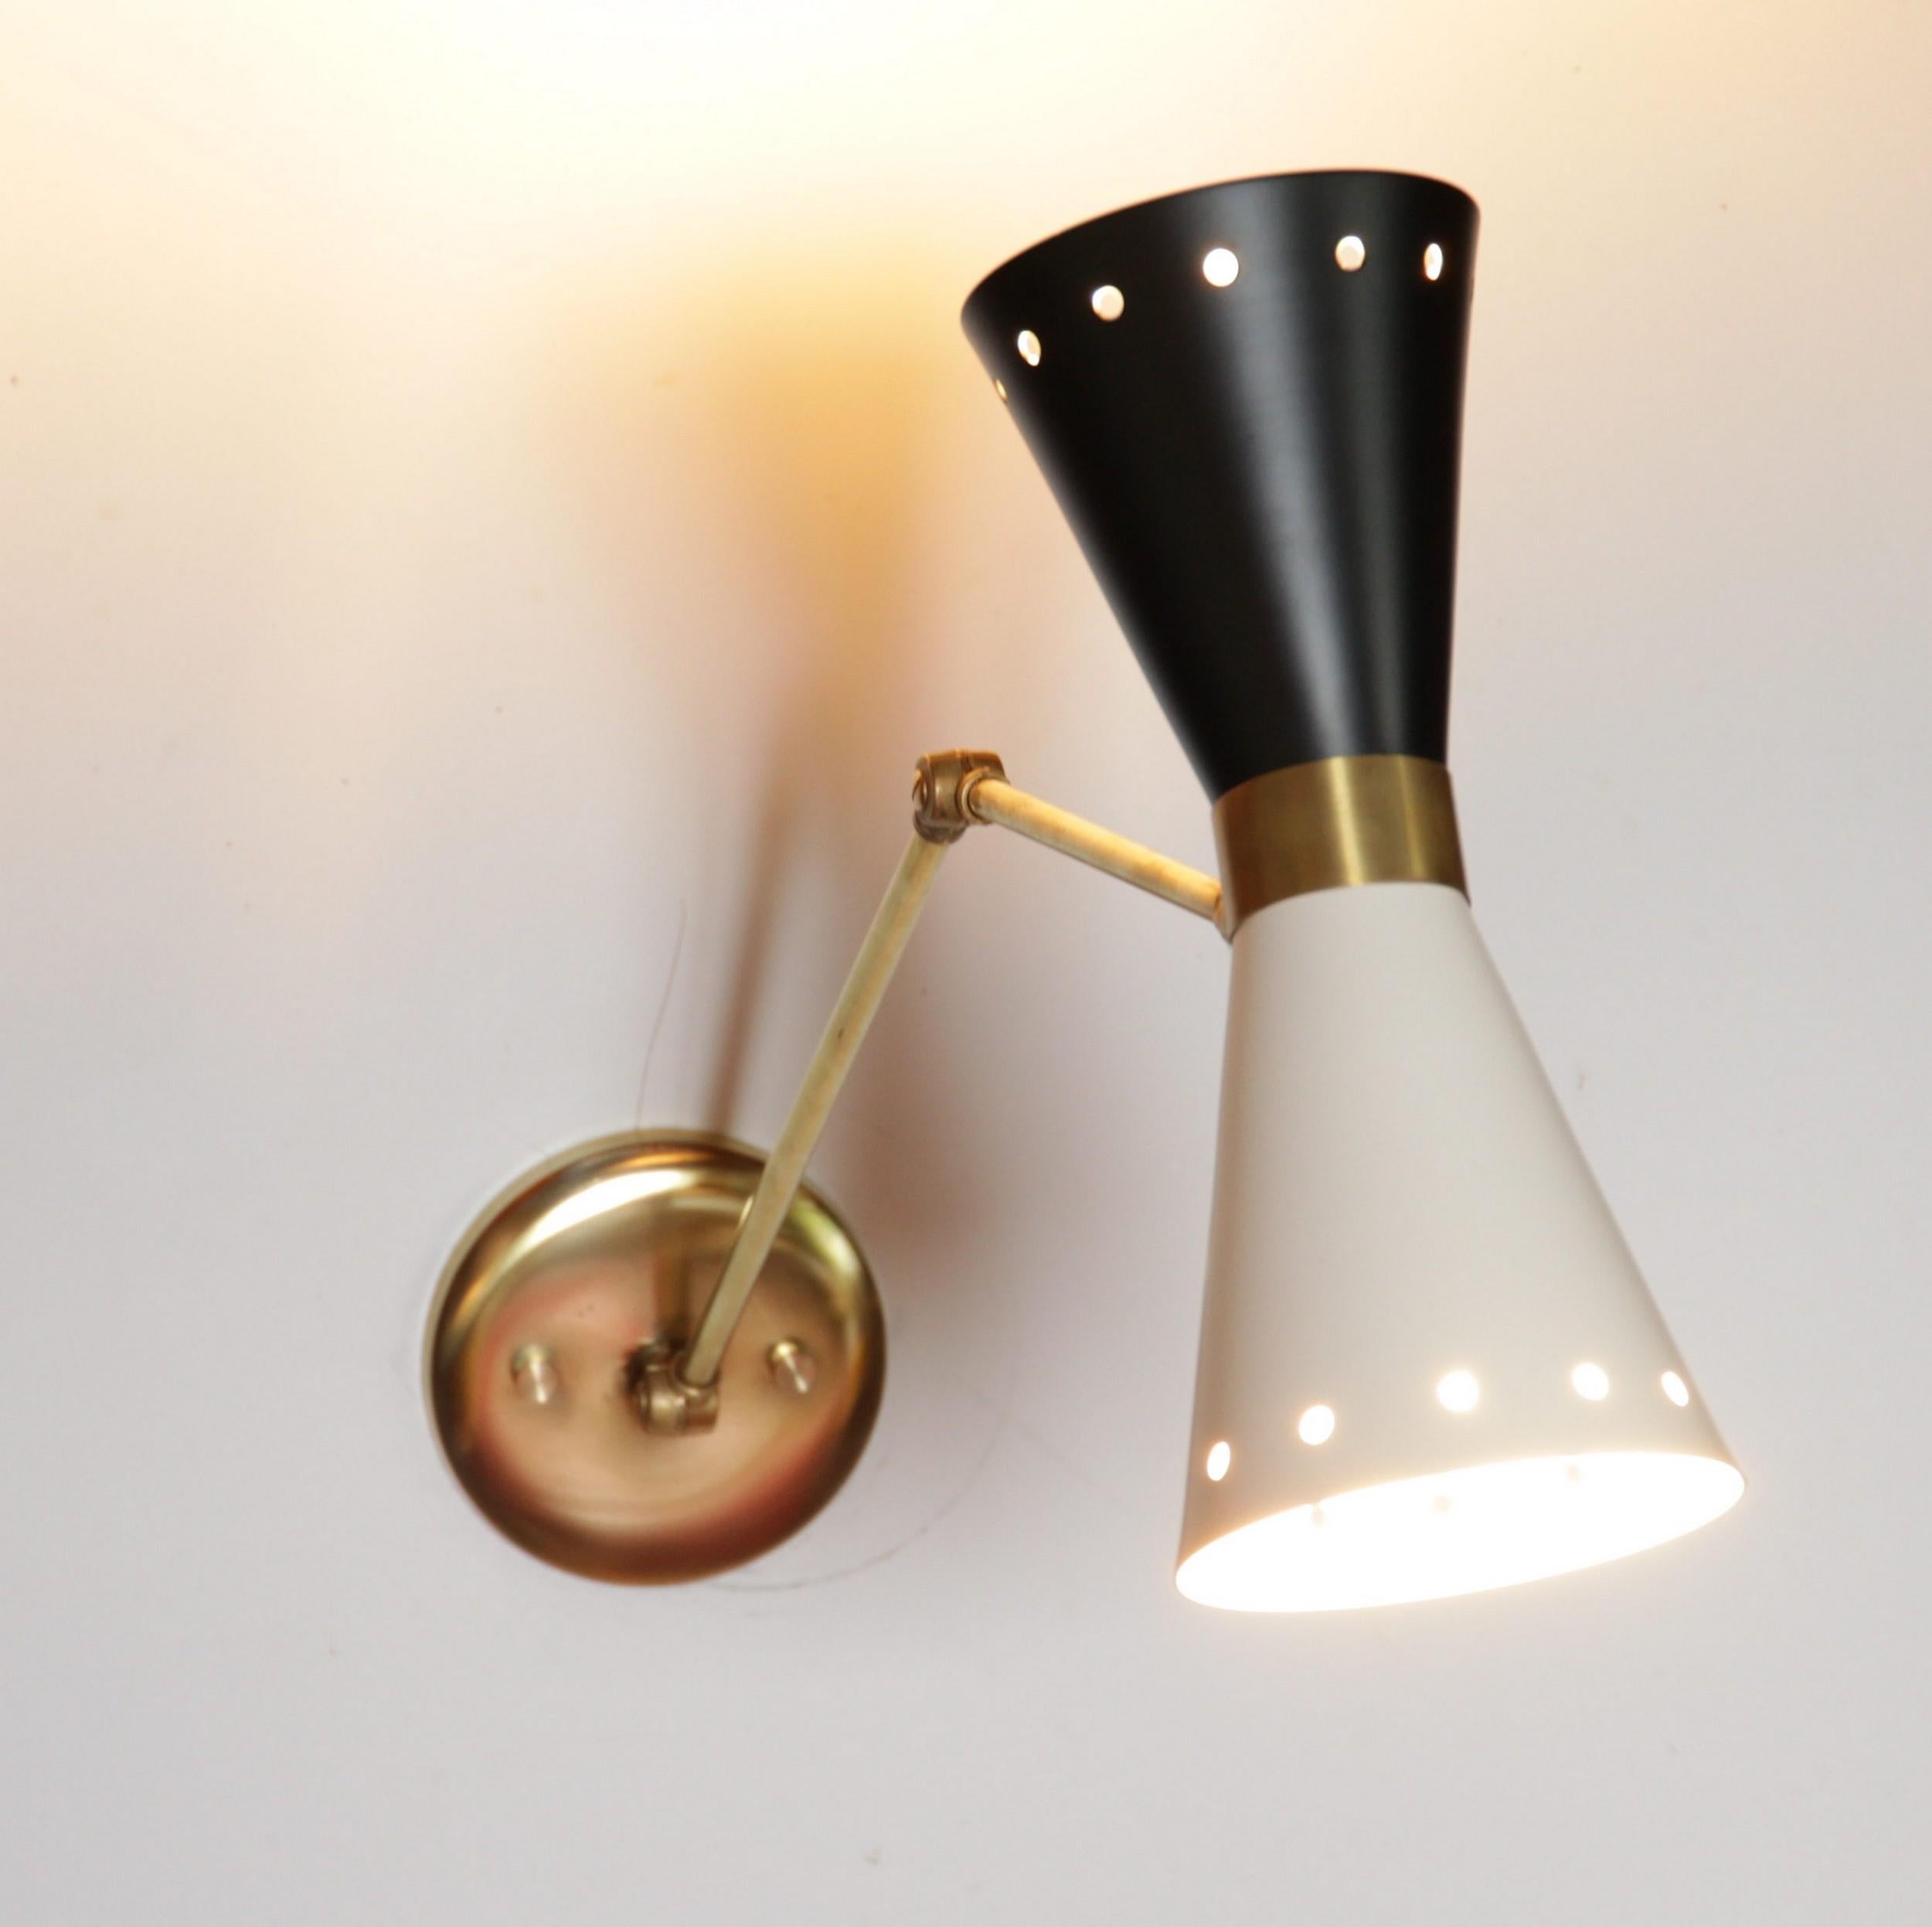 Aluminum Cono Articulated Sconce Midcentury Stilnovo Style Solid Brass Black White Shade